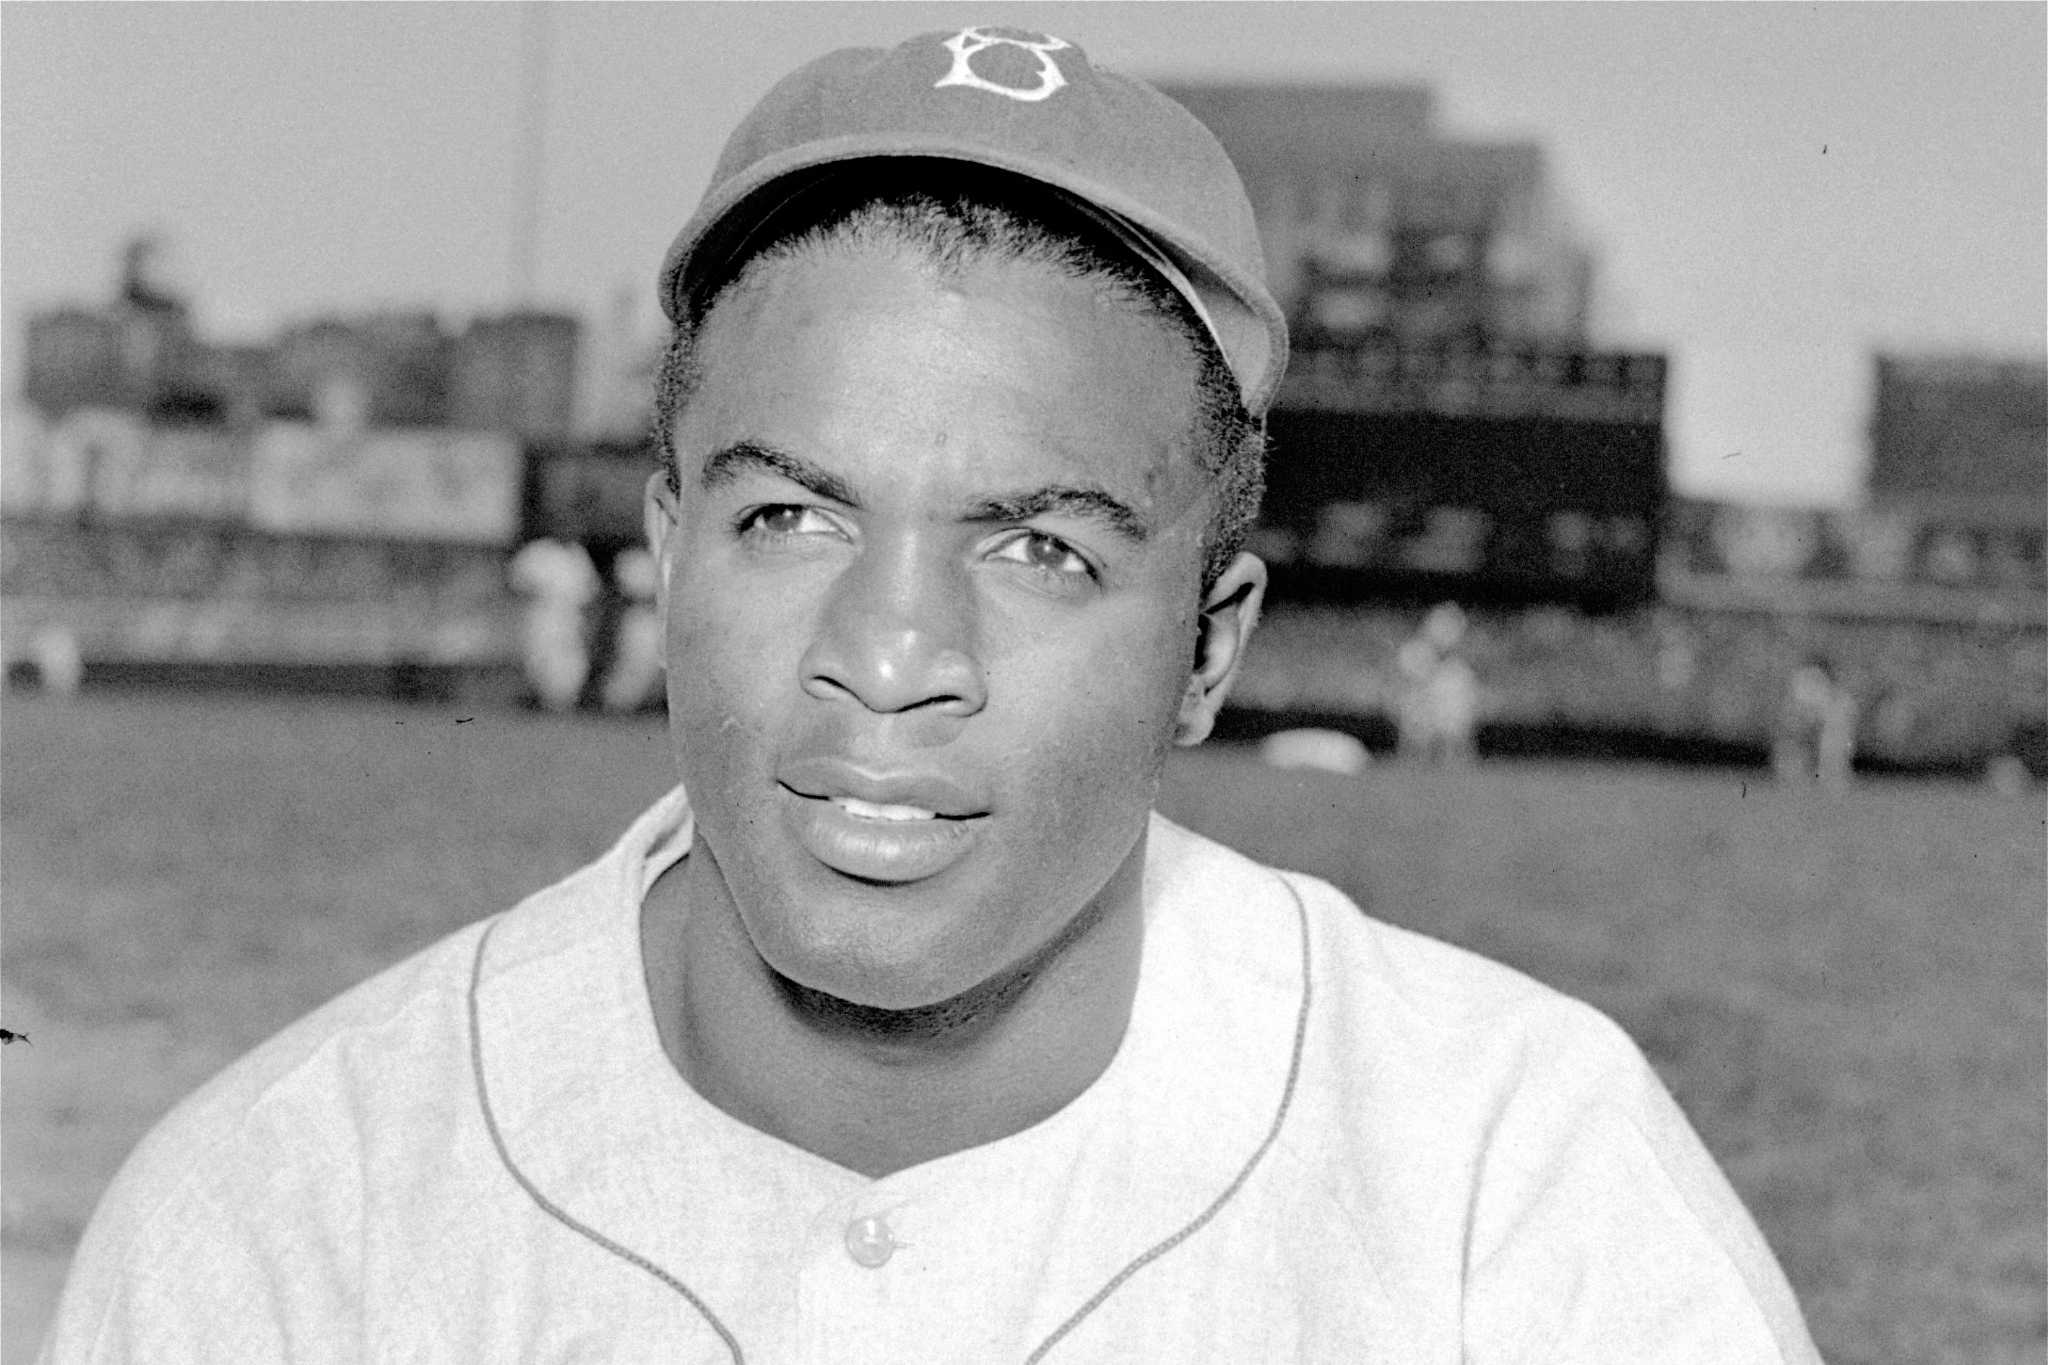 When rookie Jackie Robinson came to Detroit in 1947, Detroit Sports, Detroit